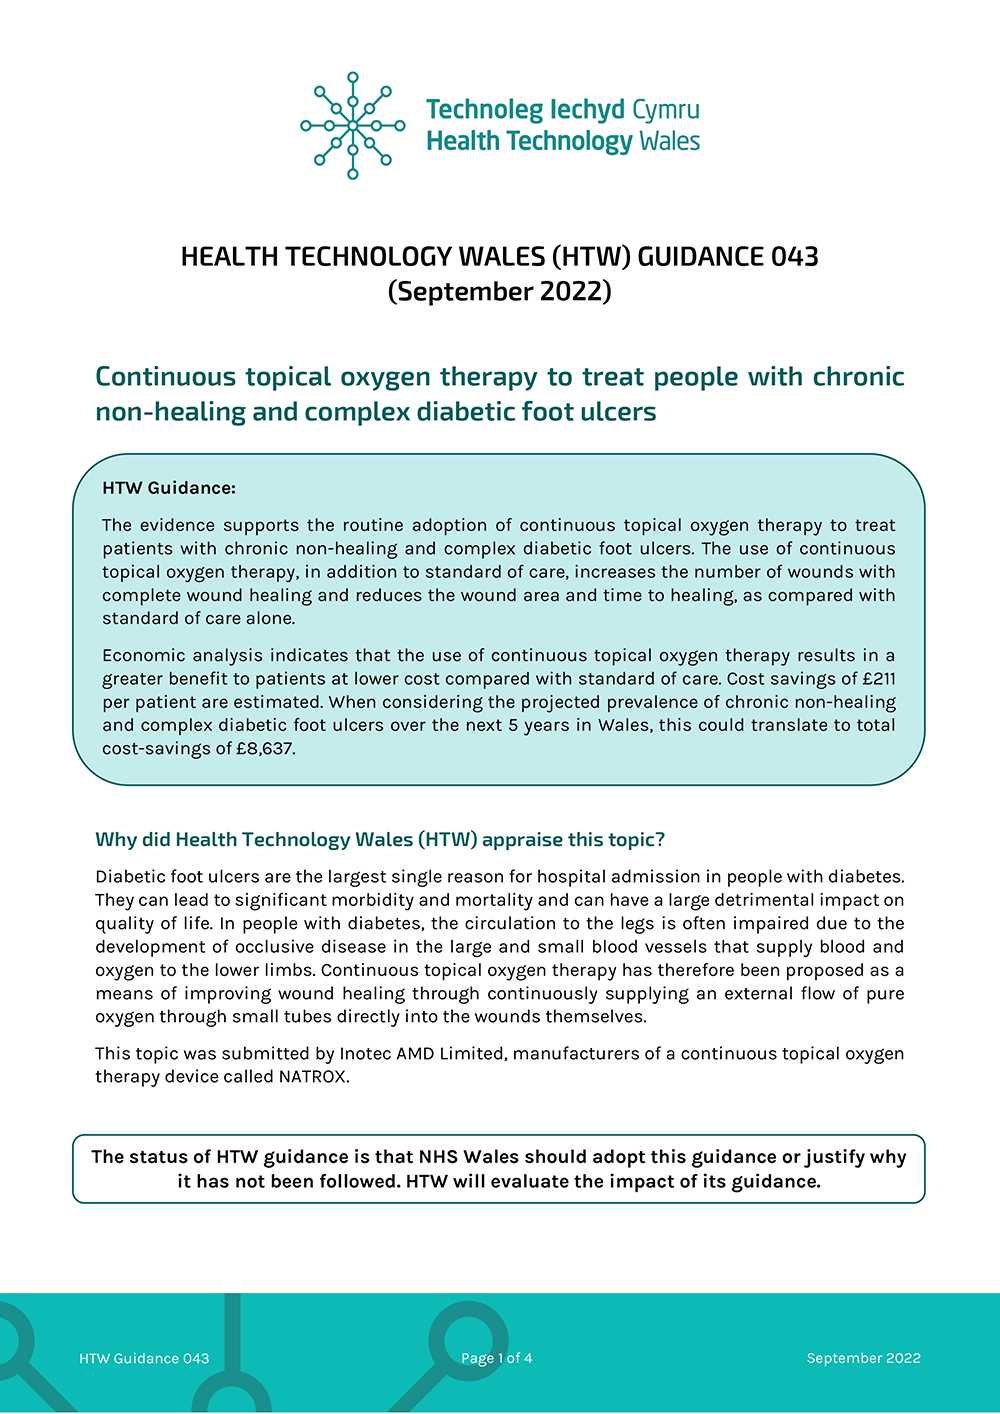 Image preview of PDF download. Displays the front page of the PDF: Health Technology Wales (HTW) Guidance Sep 2022